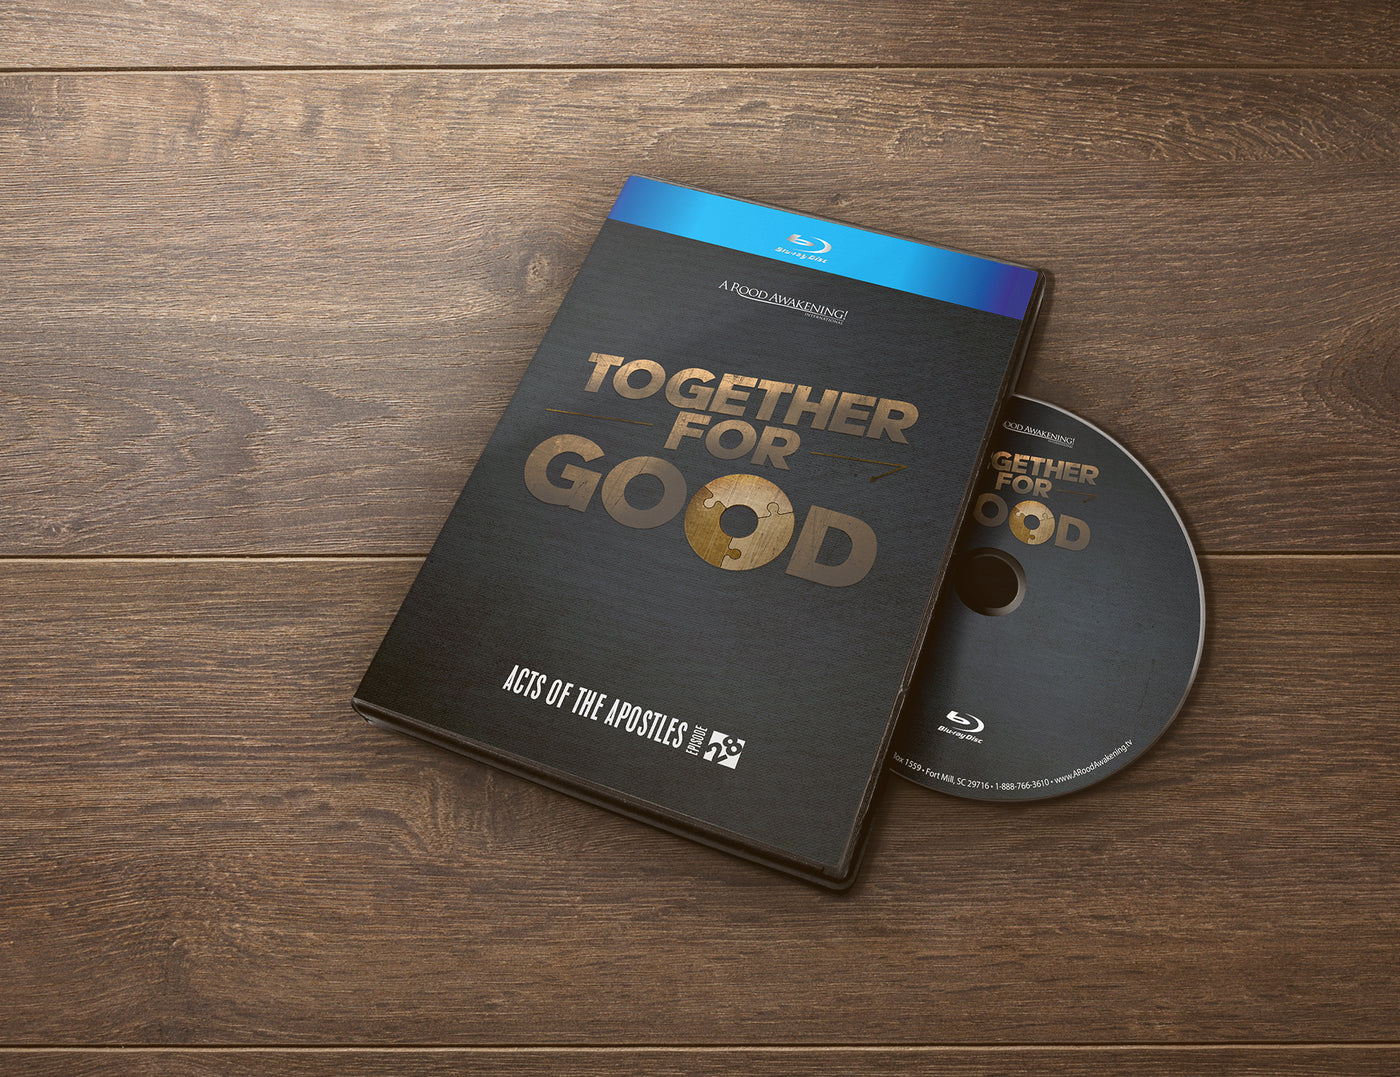 Feb 2020 Love Gift Teaching: "Together For Good"